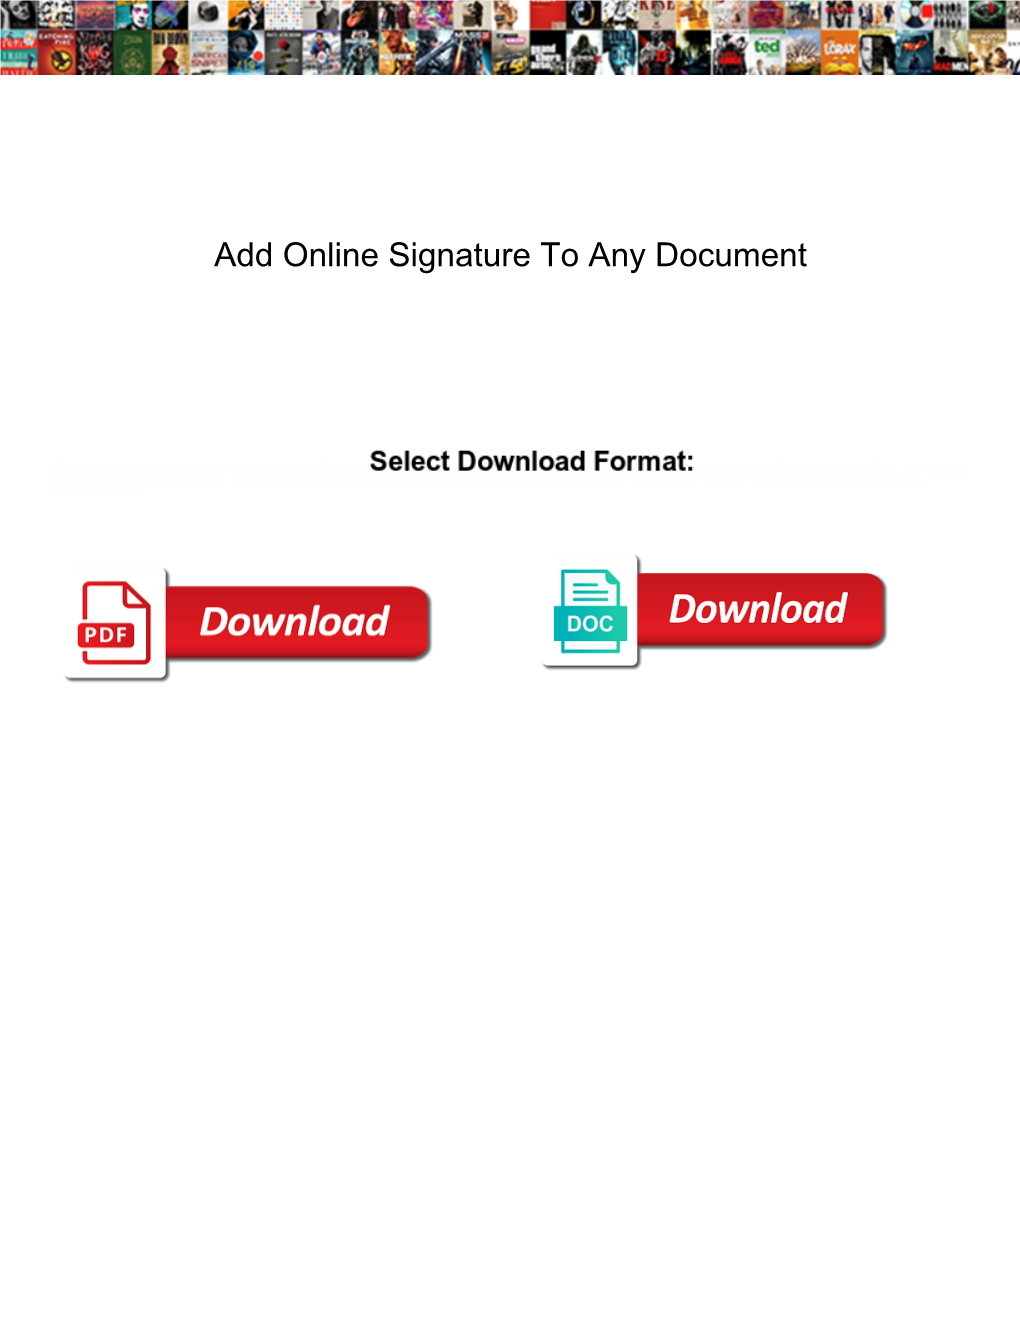 Add Online Signature to Any Document